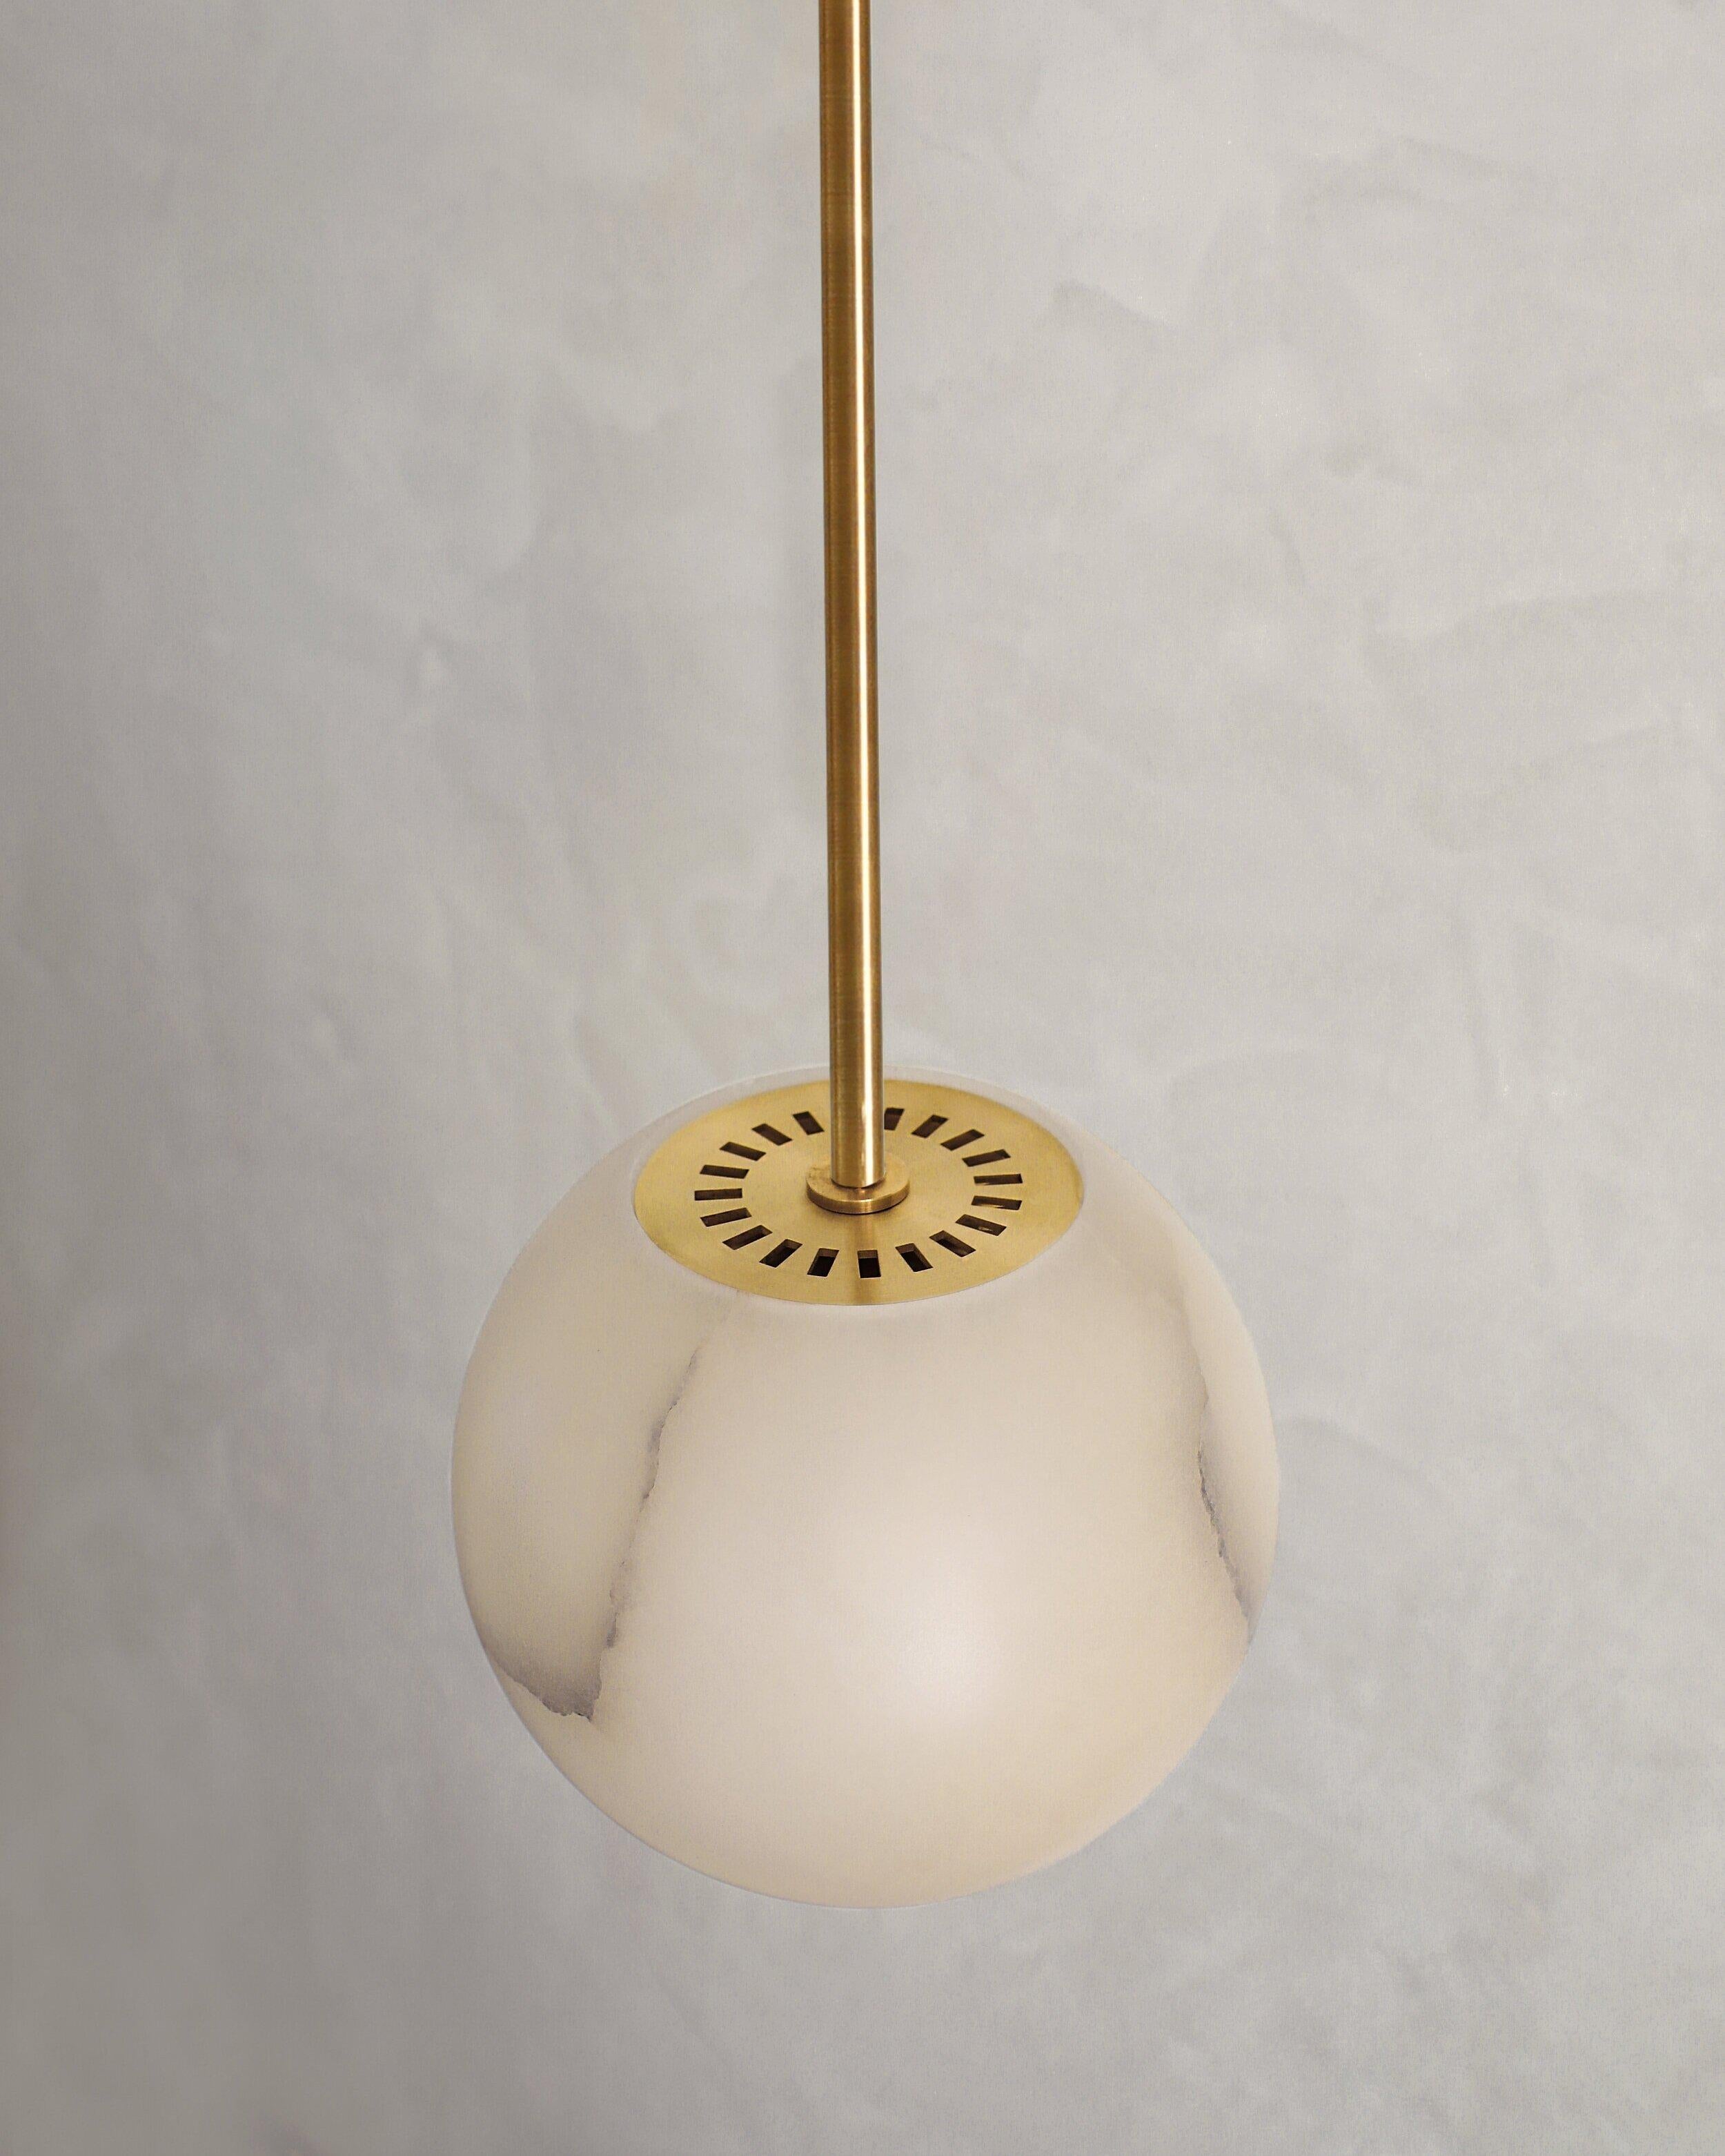 Planette tube 16.5 pendant by Contain
Dimensions: Ø 16.5 x H 100 cm (custom lenght).
Materials: Alabaster, brass.

Also available in different finishes and dimensions (Ø10 cm / Ø16,5 cm / Ø18 cm / Ø22 cm x custom length). Please contact